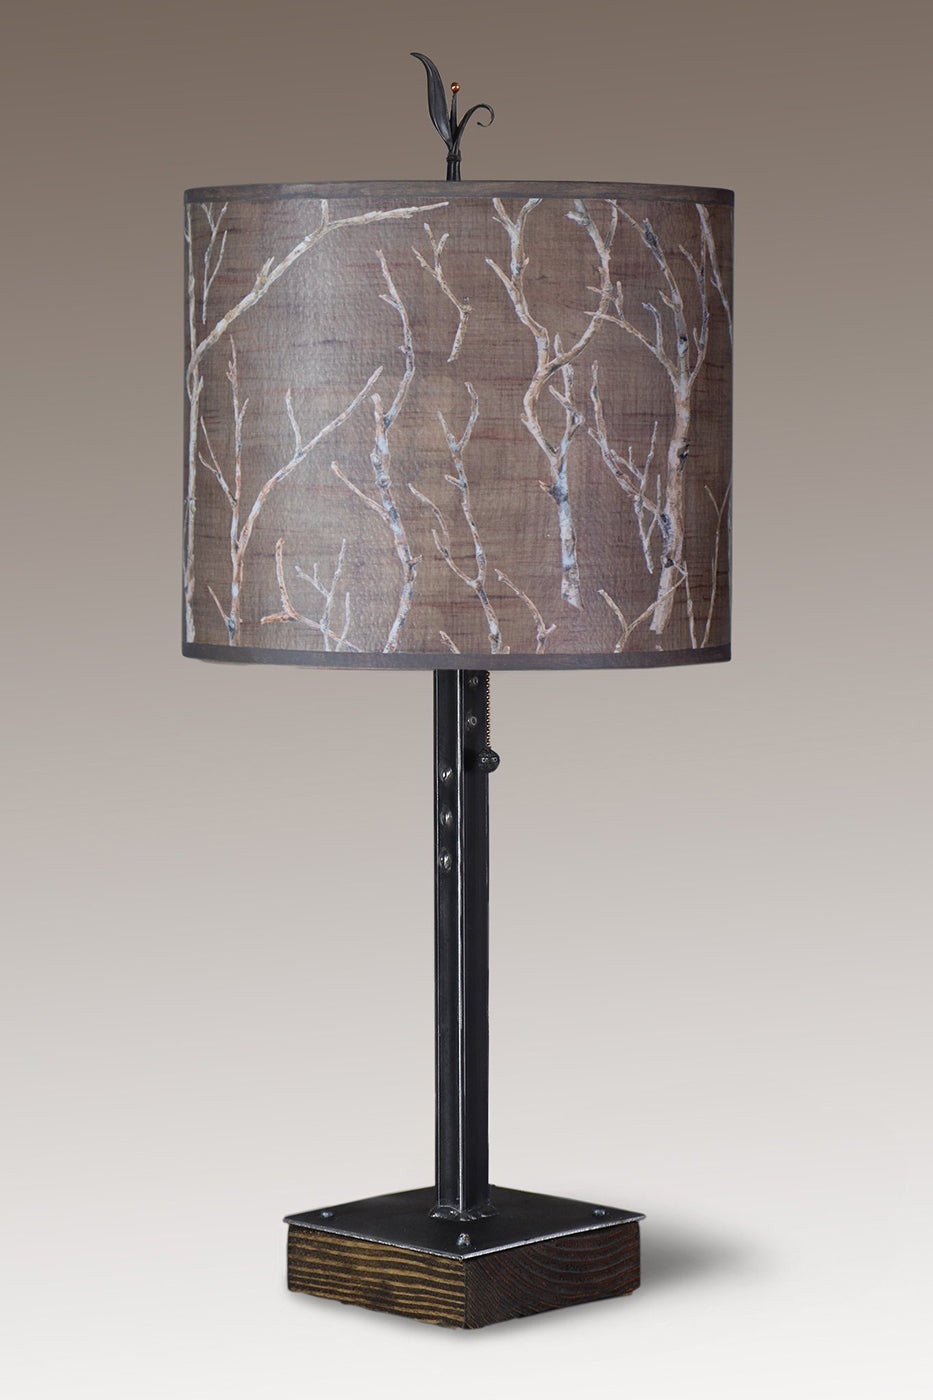 Steel Table Lamp on Wood with Large Oval Shade in Twigs